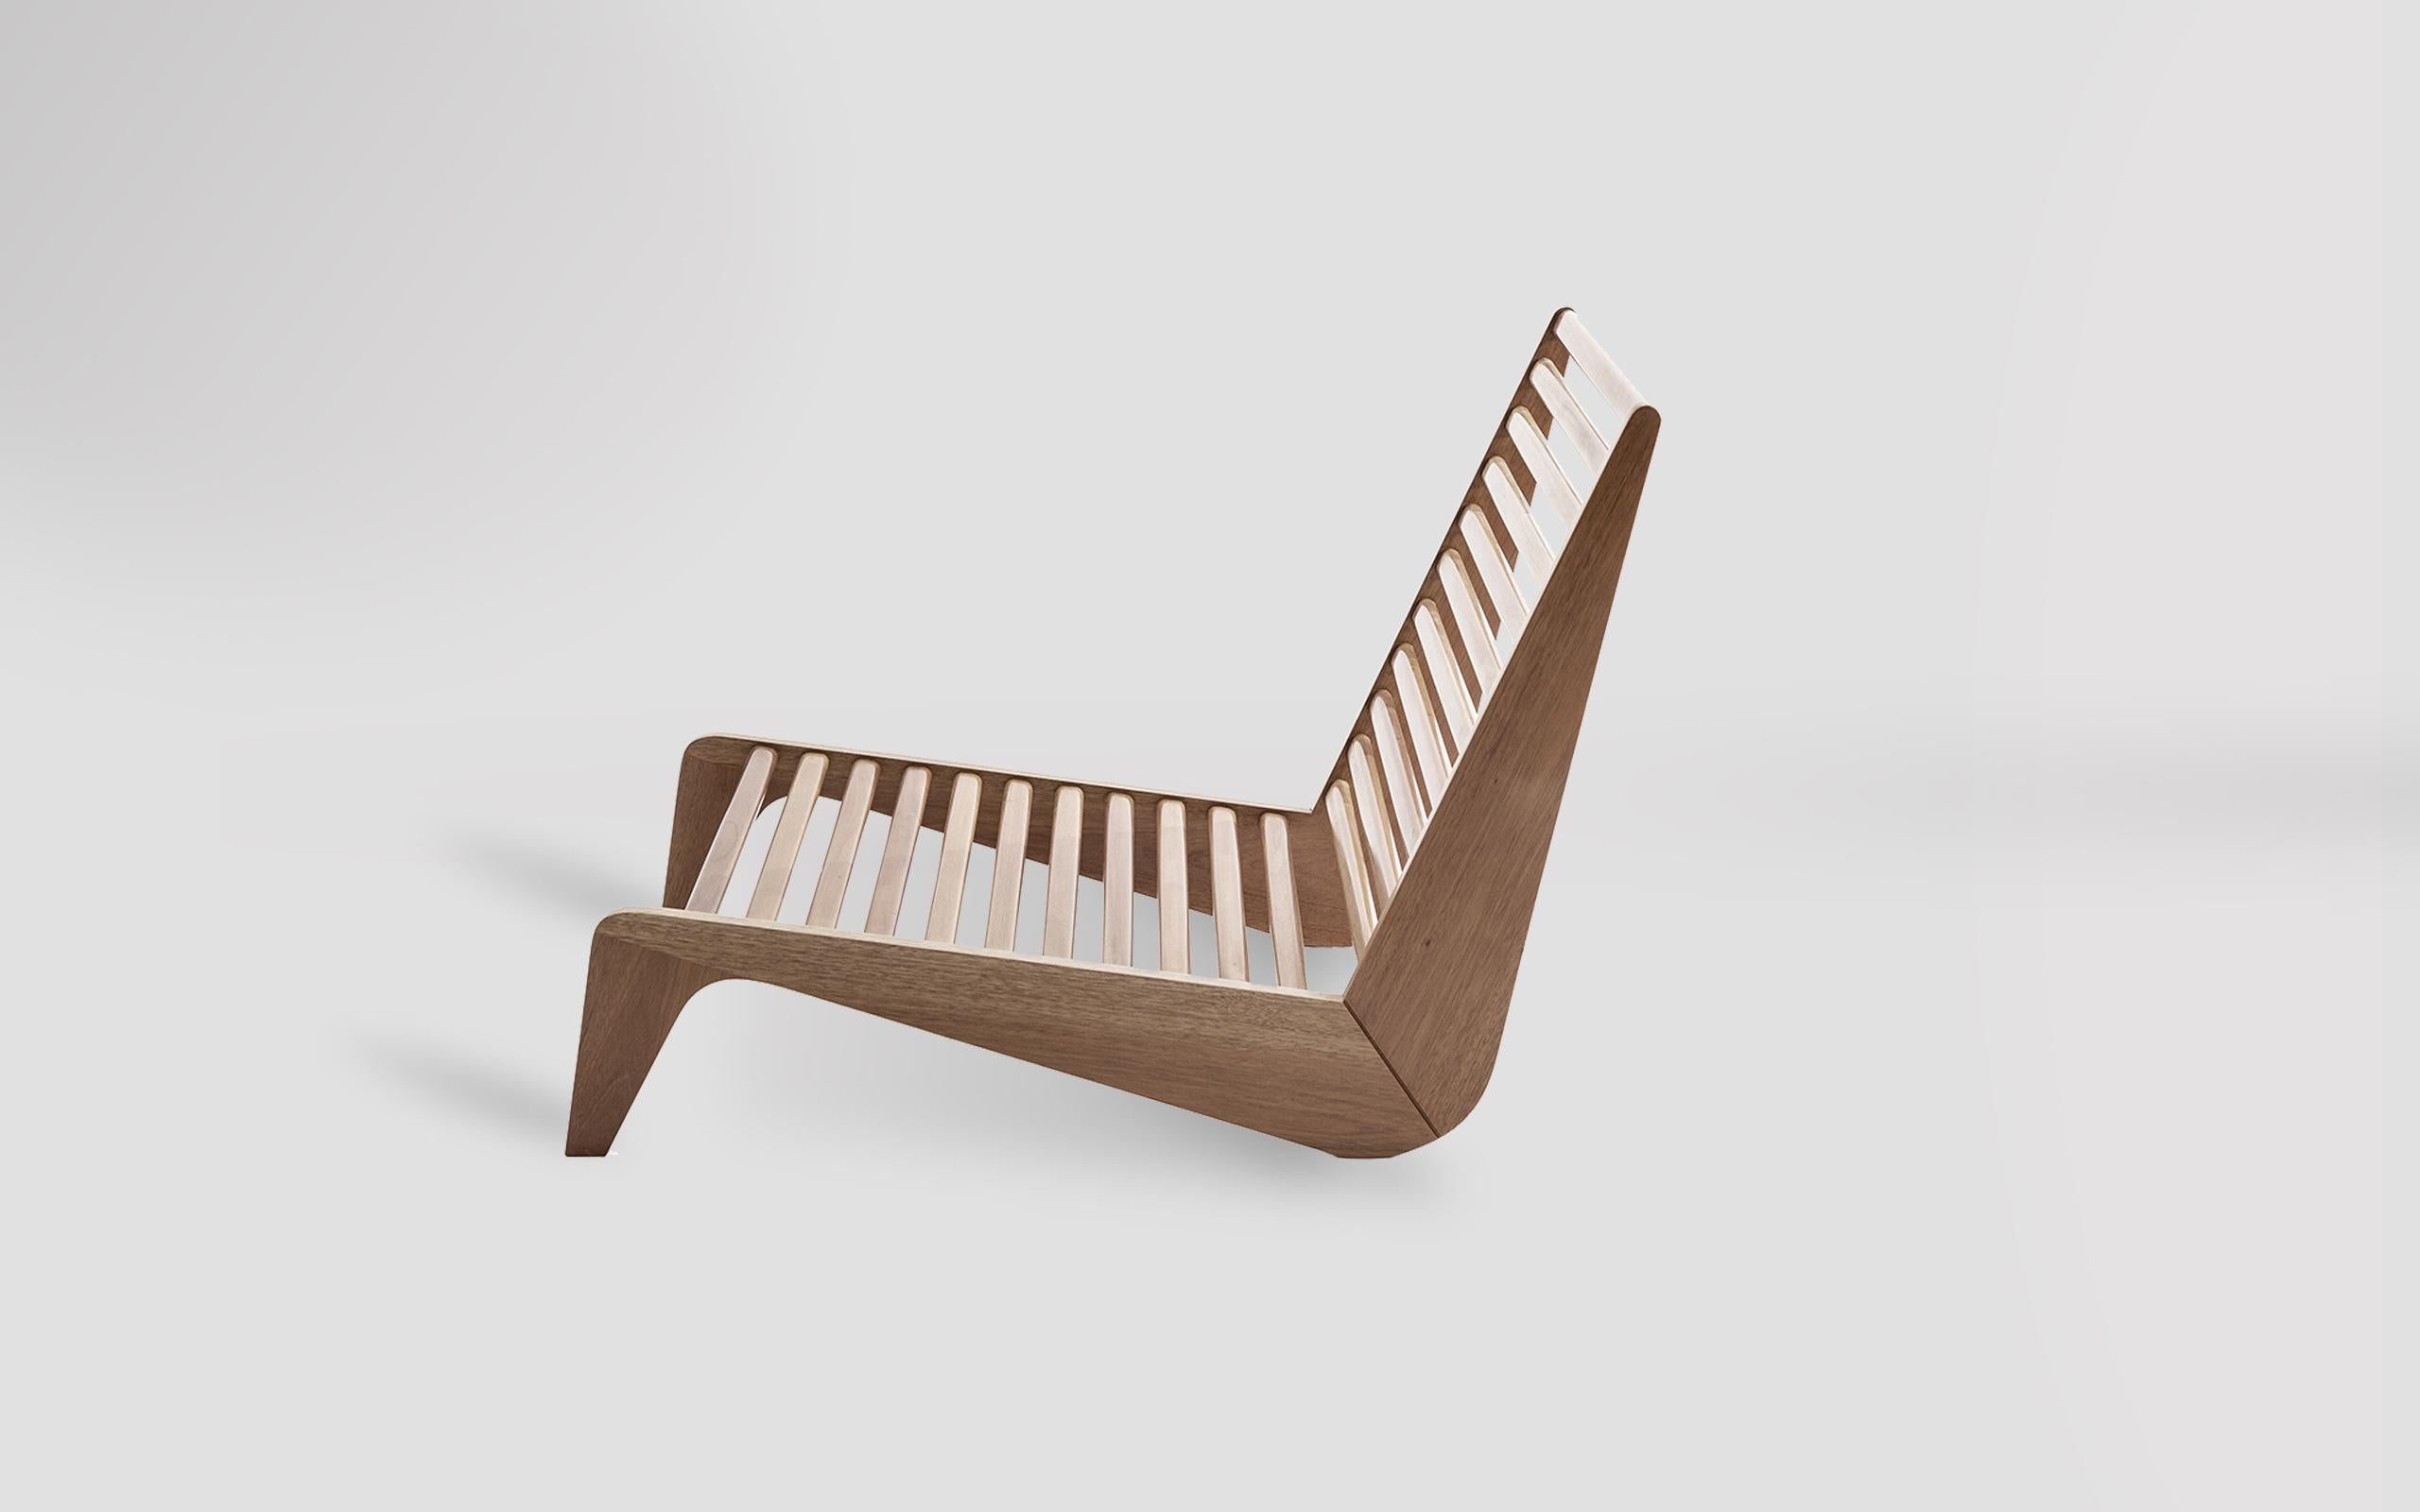 Ala bench by Atra Design
Dimensions: D 101.2 x W 66.1 x H 69.6 cm
Materials: teak or mahogany wood

Atra Design
We are Atra, a furniture brand produced by Atra form a mexico city–based high end production facility that also houses our founder